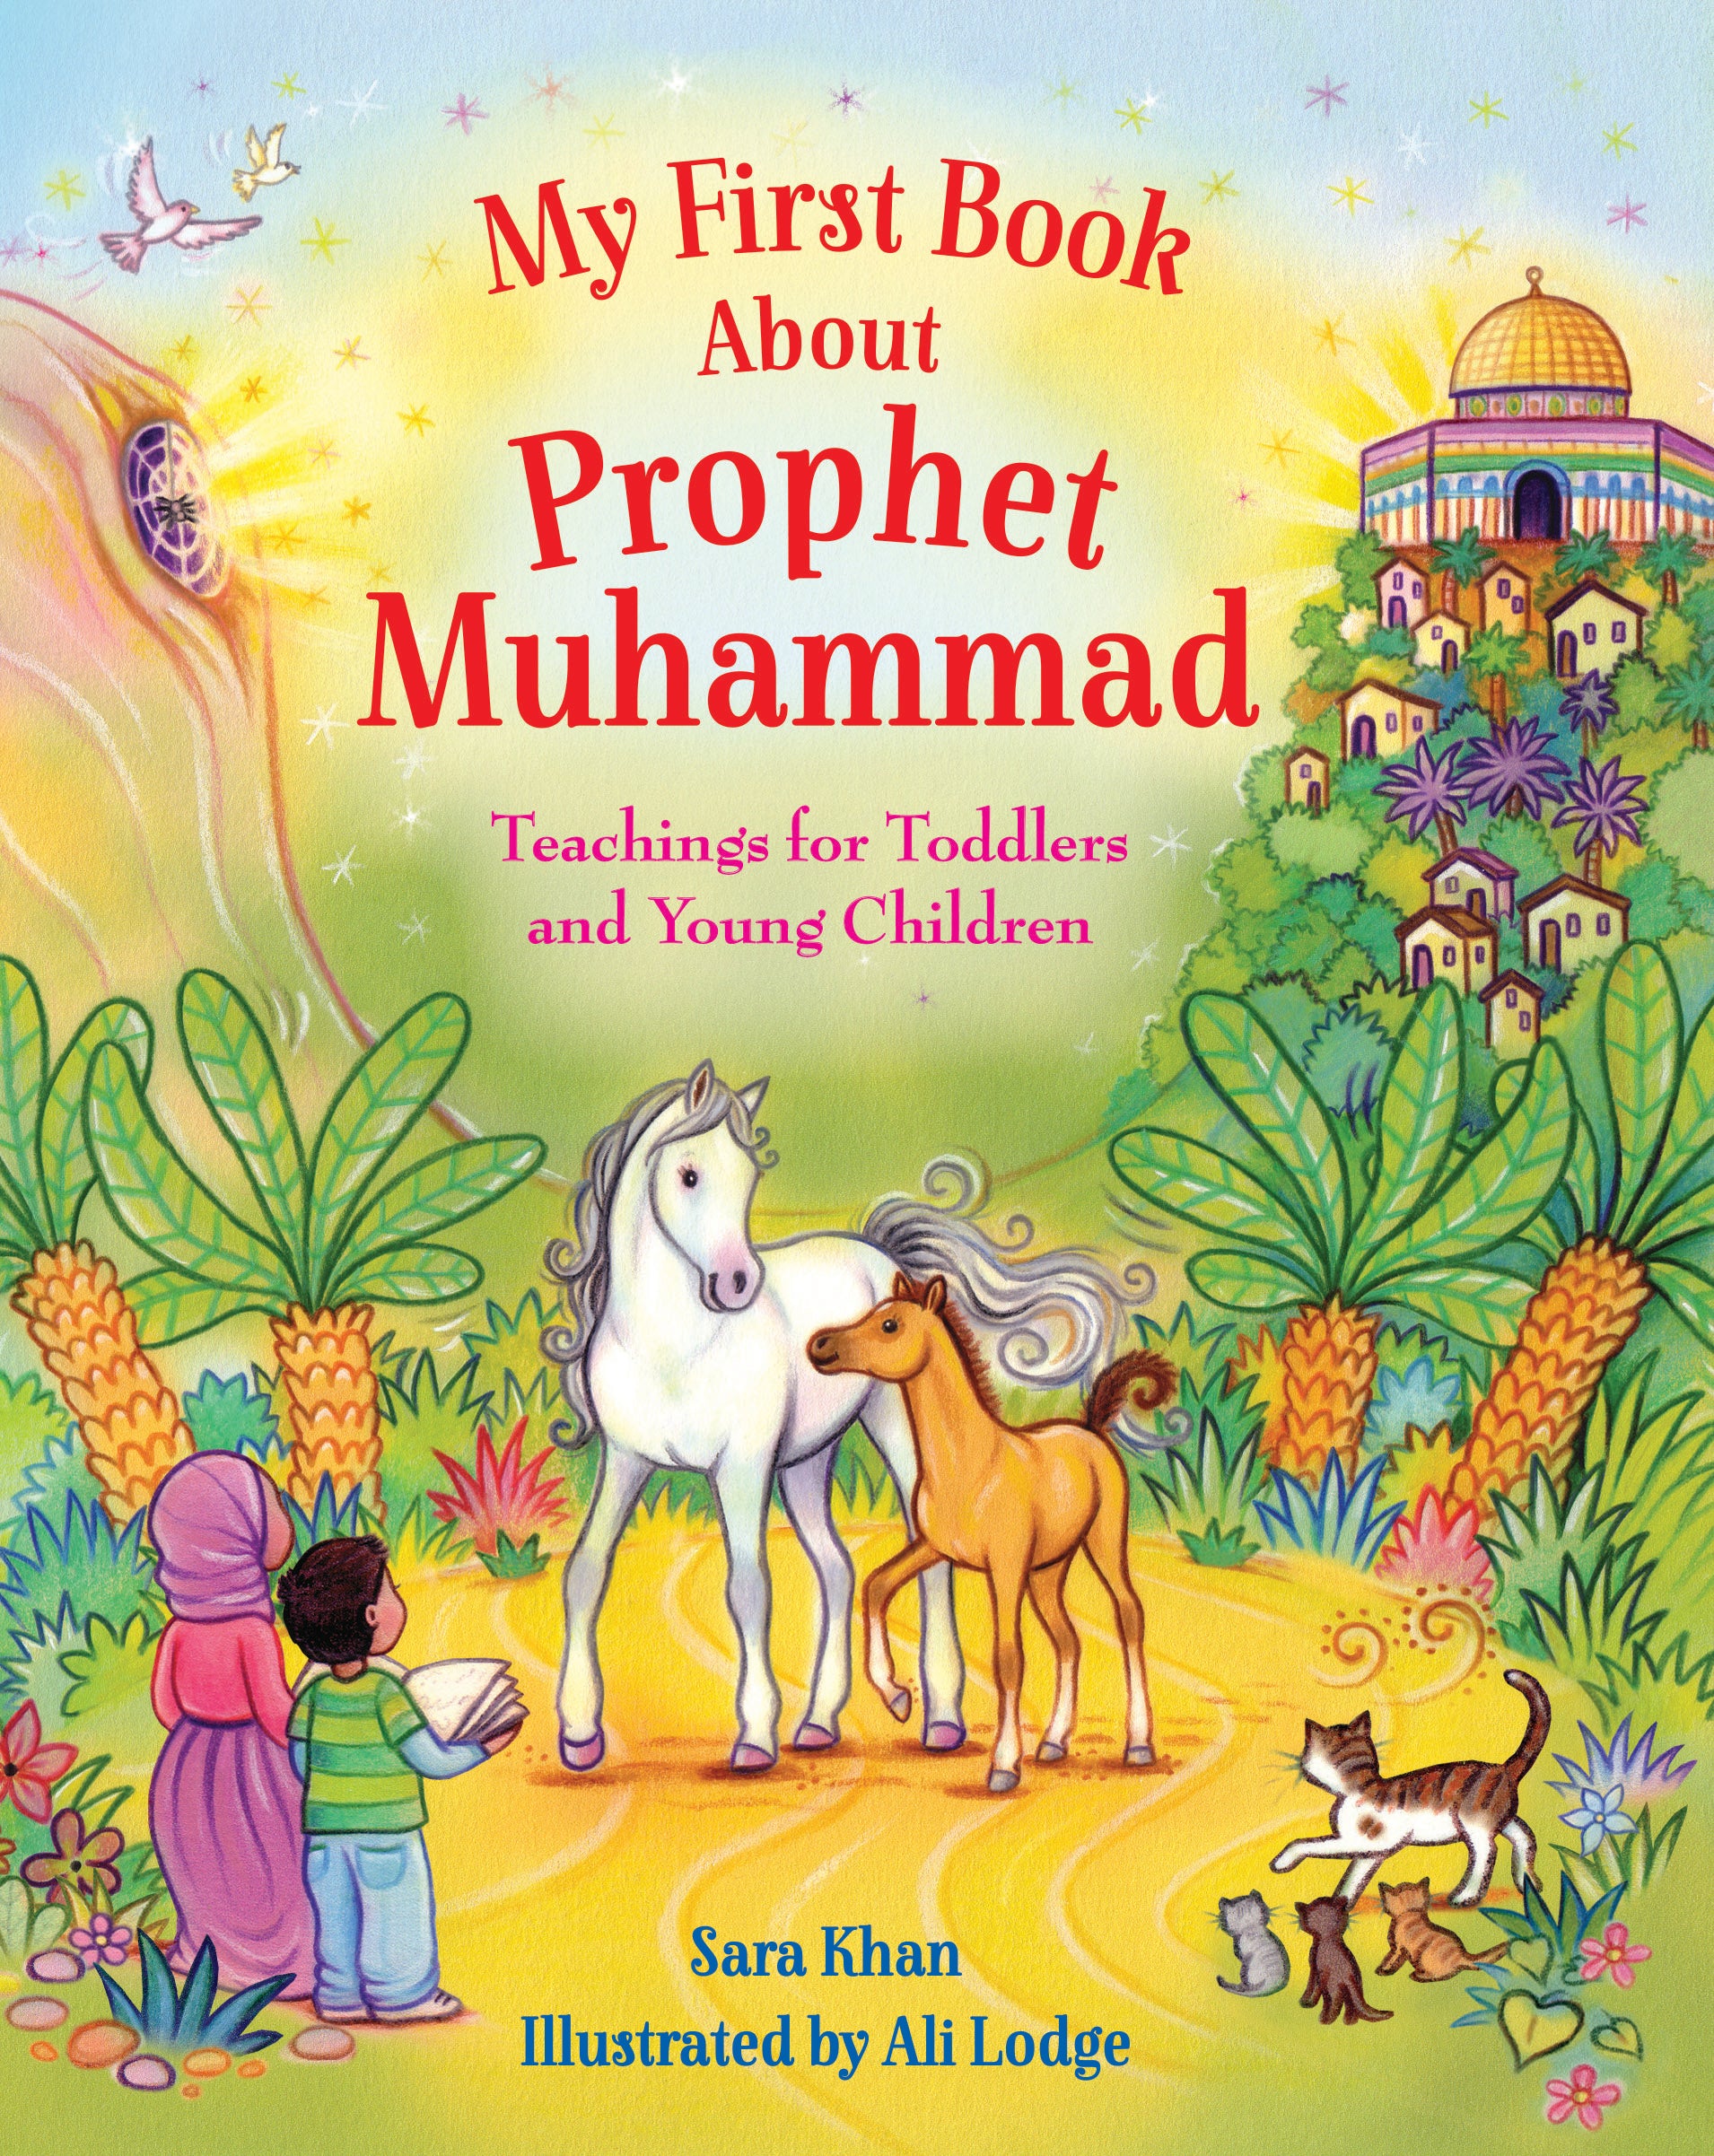 My First Book About Prophet Muhammad - Anafiya Gifts